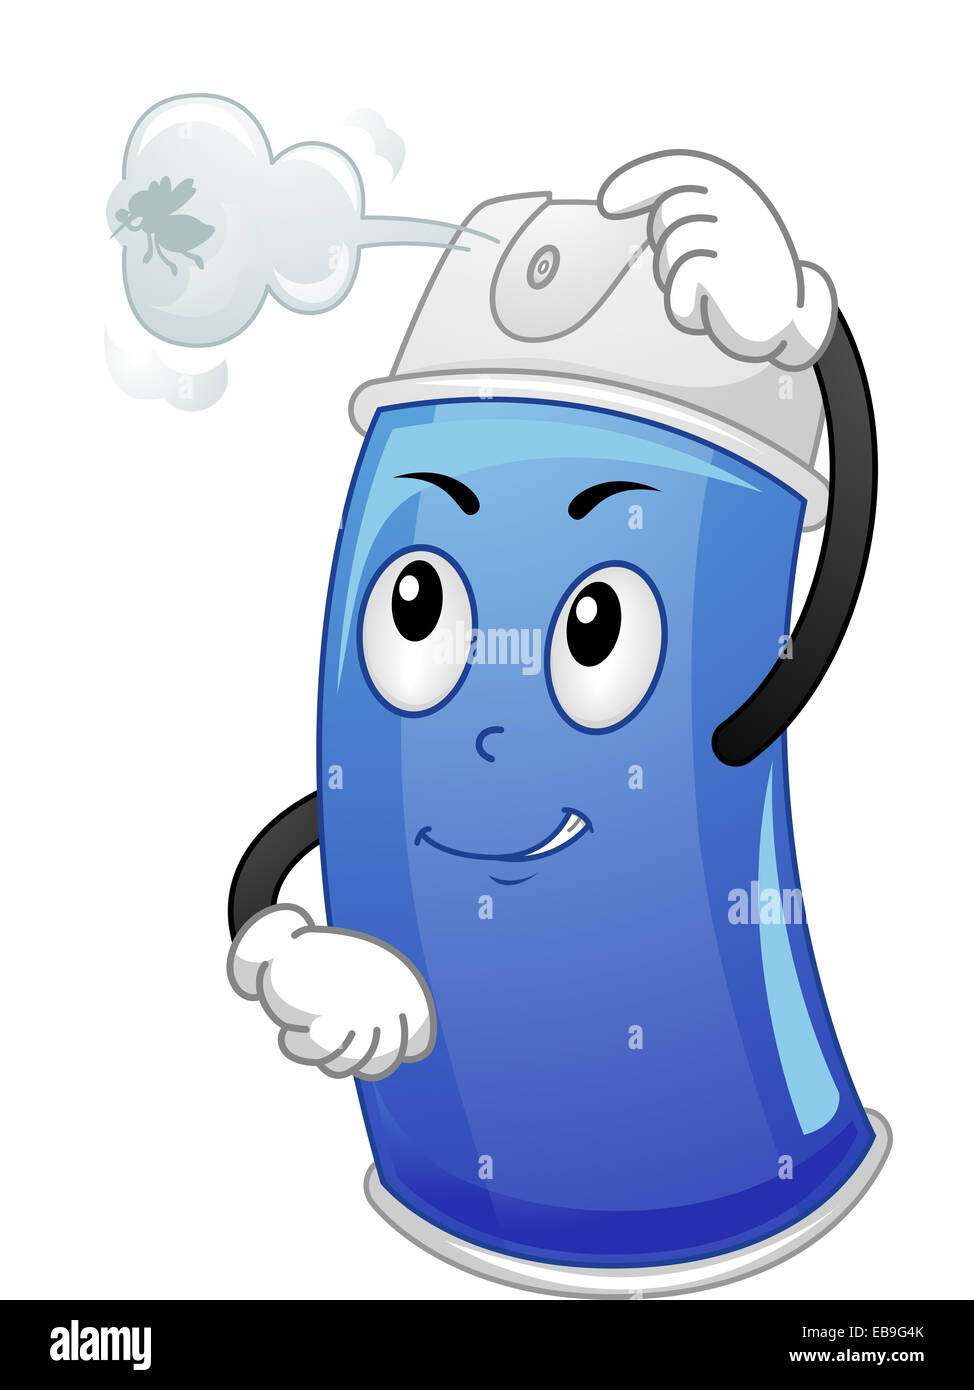 Mascot Illustration Featuring a Canister of Insecticide Spray spraying an Insect Stock Photo